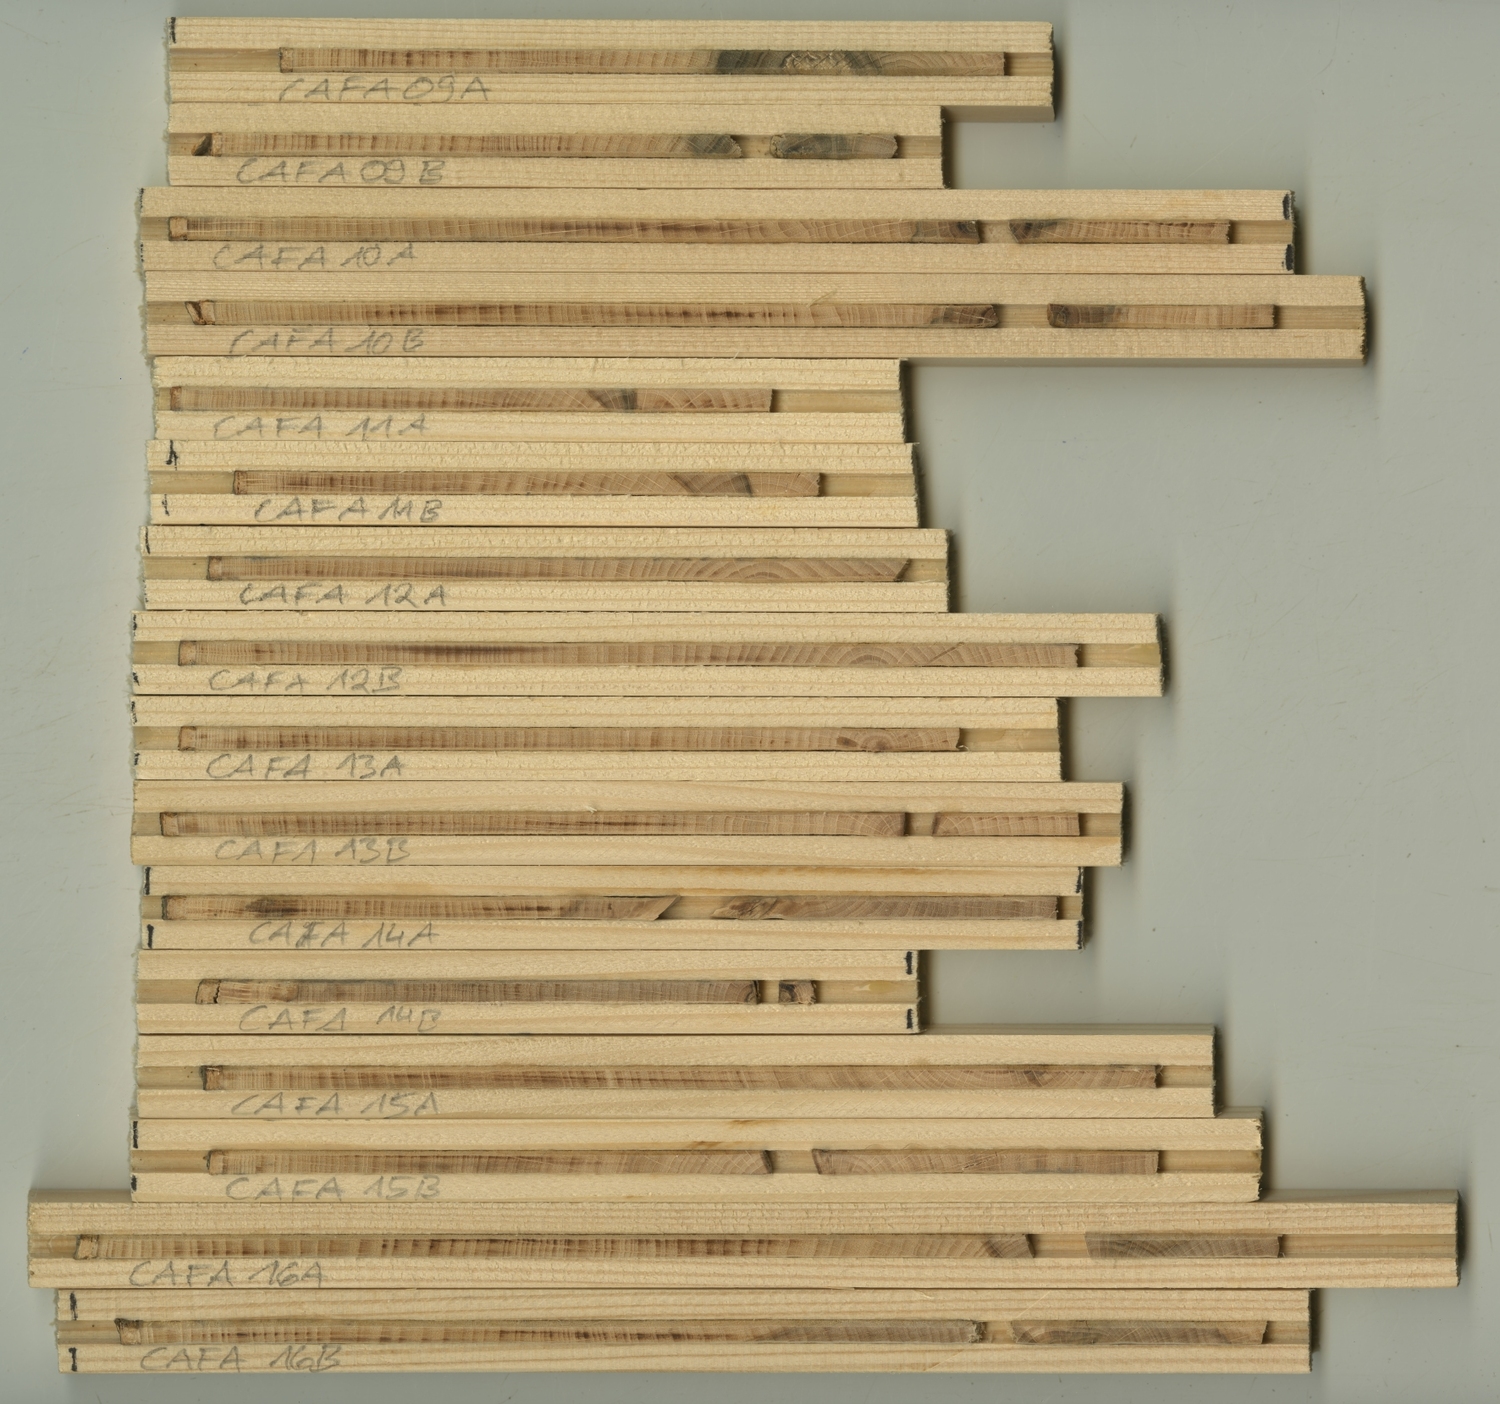 Samples of wood are taken from European beech. They are glued to wooden strips and prepared with razor blade or sandpaper so that the annual rings are clearly visible on the smooth surfaces and can be measured and dated using a microscope.